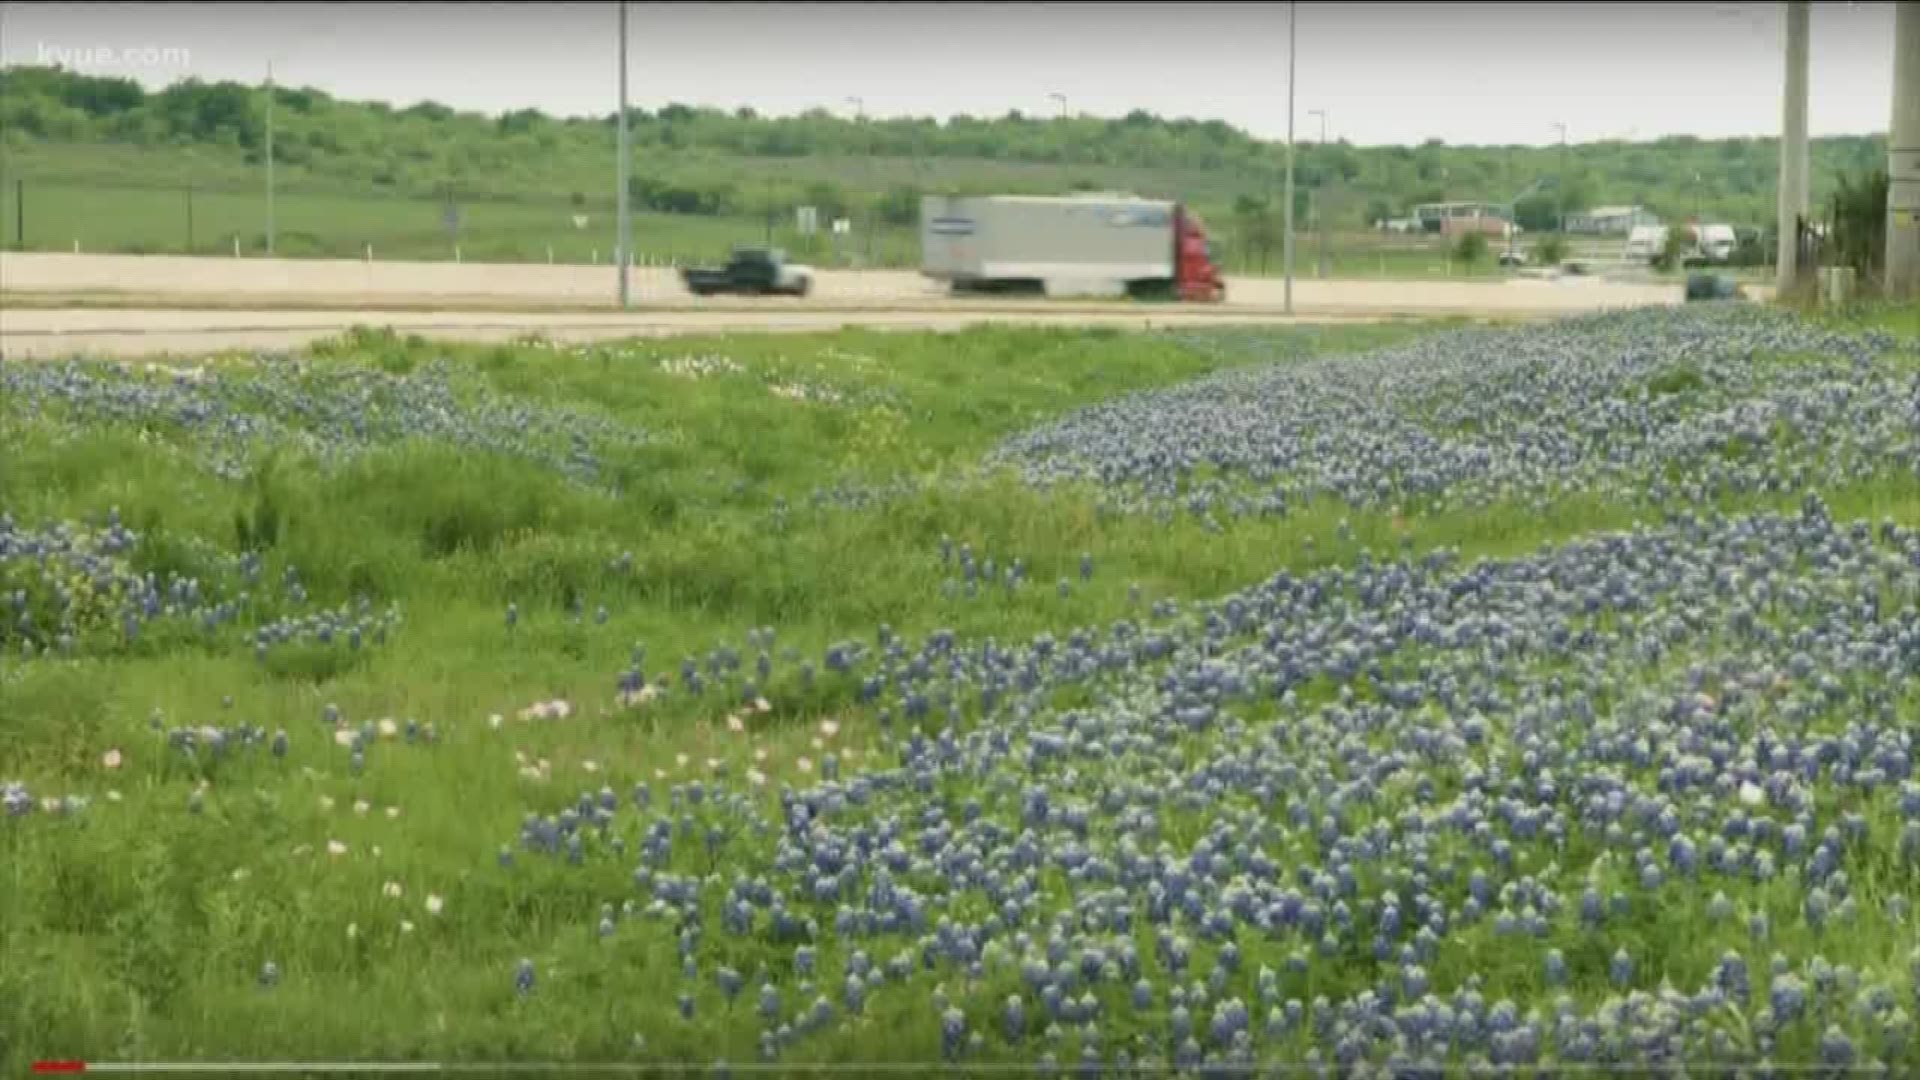 In order to enjoy those beautiful Texas wildflowers in the spring, officials say now is the time to plant.